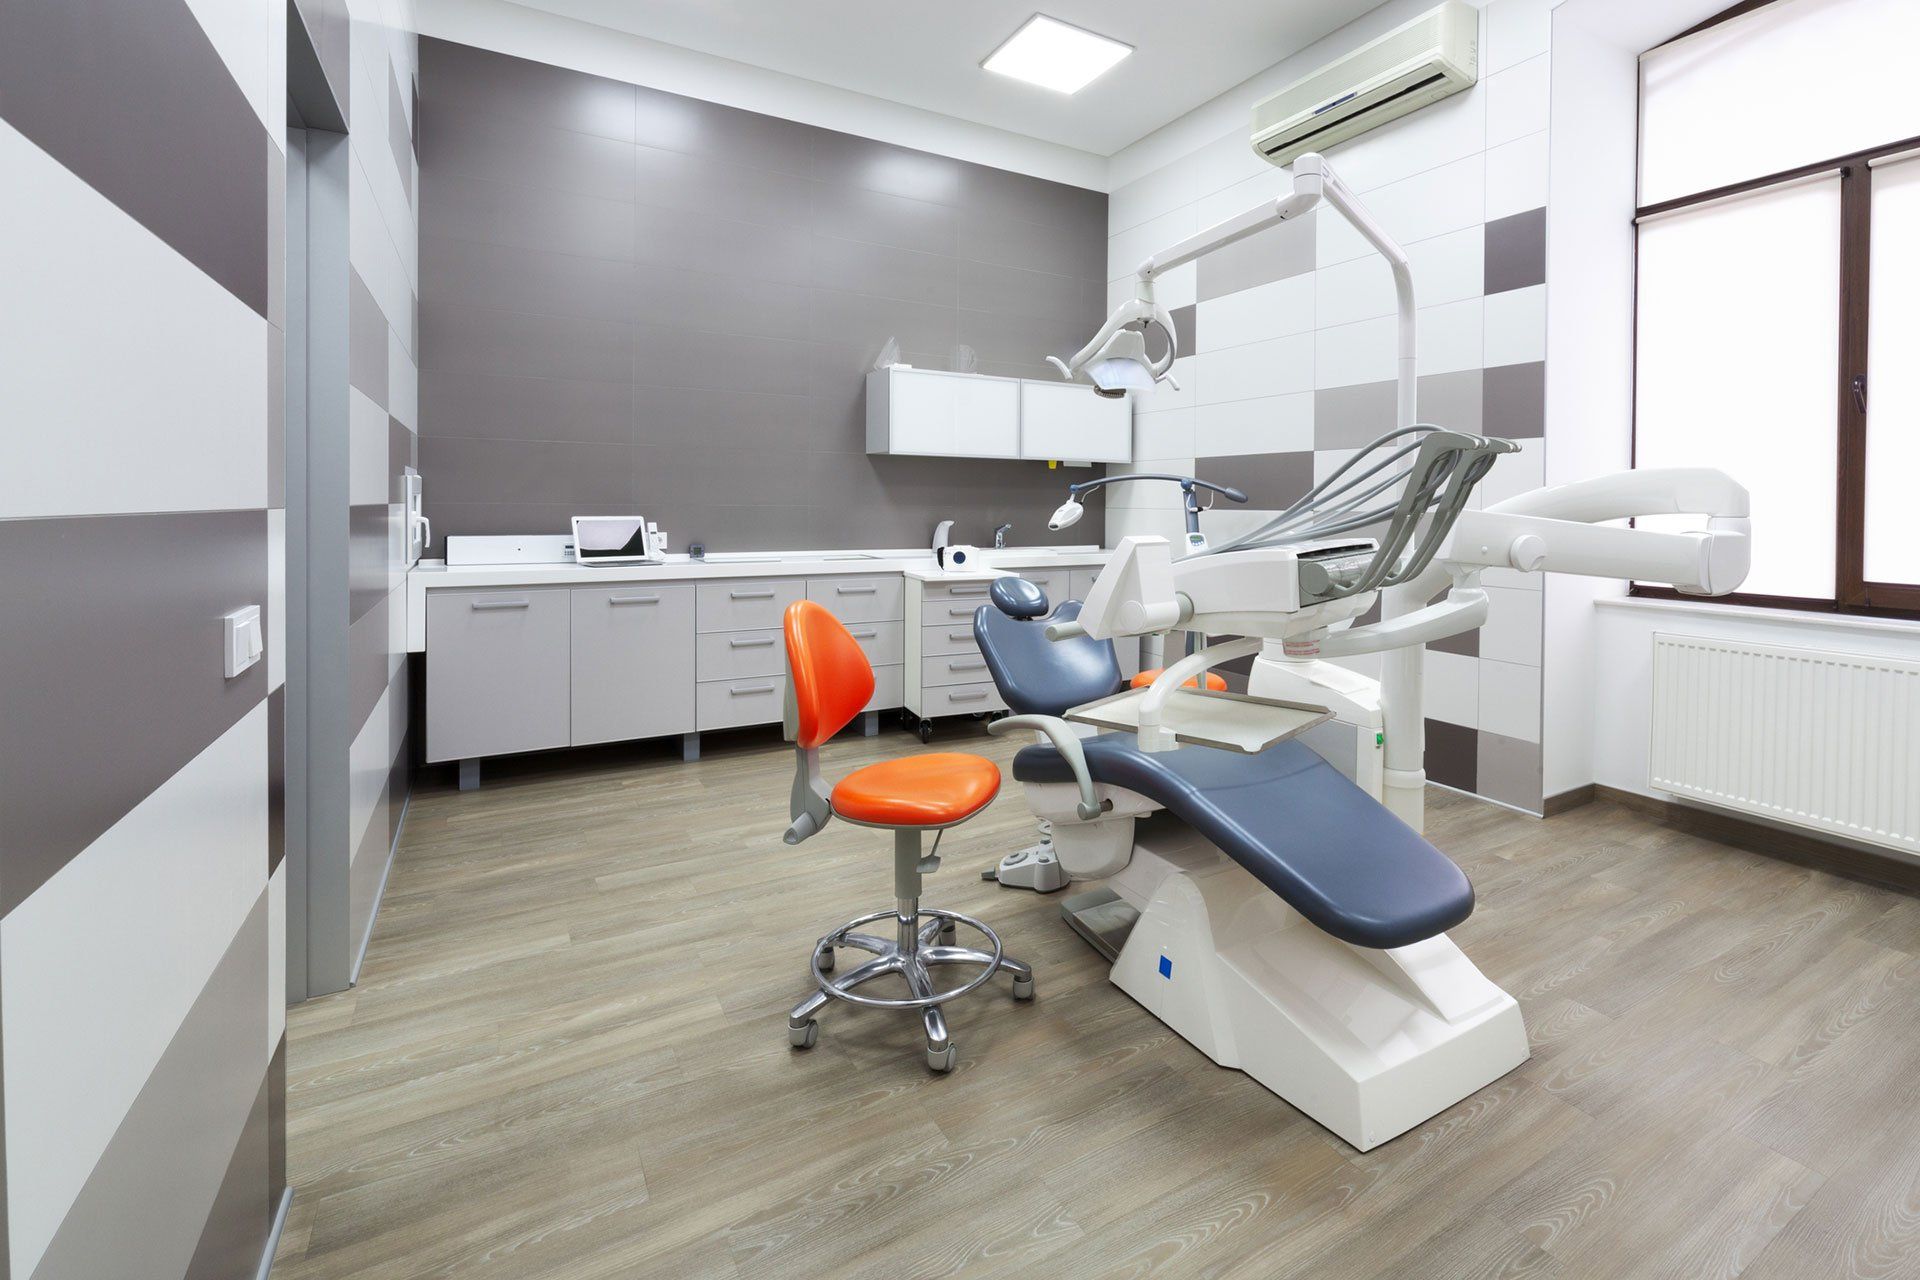 Dental room for patients of all ages in North Tonawanda, NY